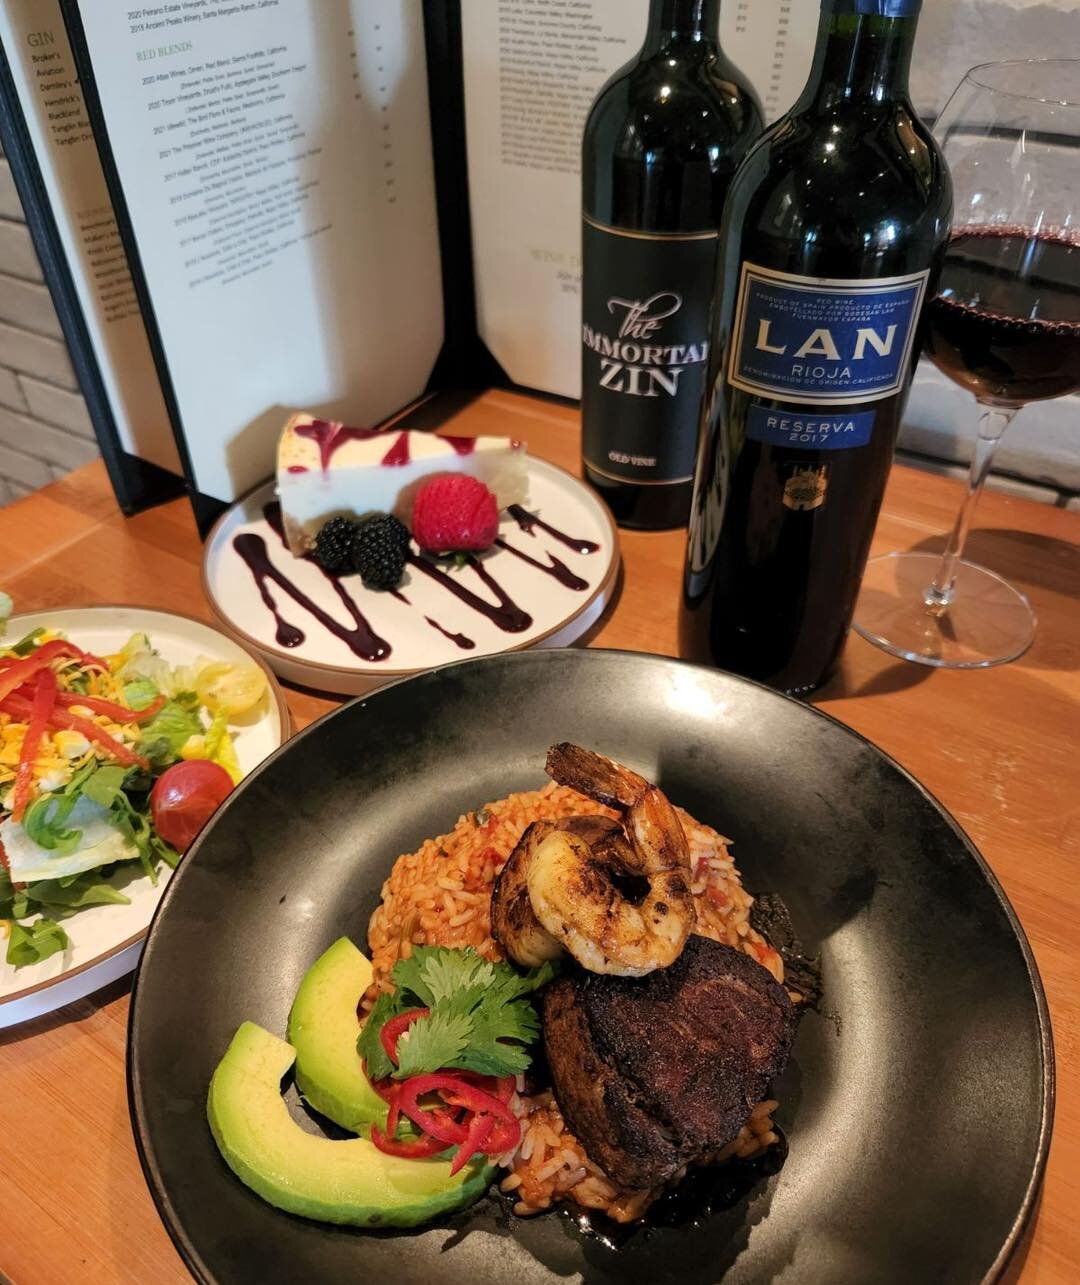 Grab your date and come relax - it&rsquo;s the perfect night for Dinner for Two!! 💃🕺 

🥗 Salad with smoked cheddar, tomatoes, coats and roasted peppers

🥩 Spice-rubbed Filet Mignon with Chipotle lime shrimp, Spanish rice

🍰 Raspberry White Choco